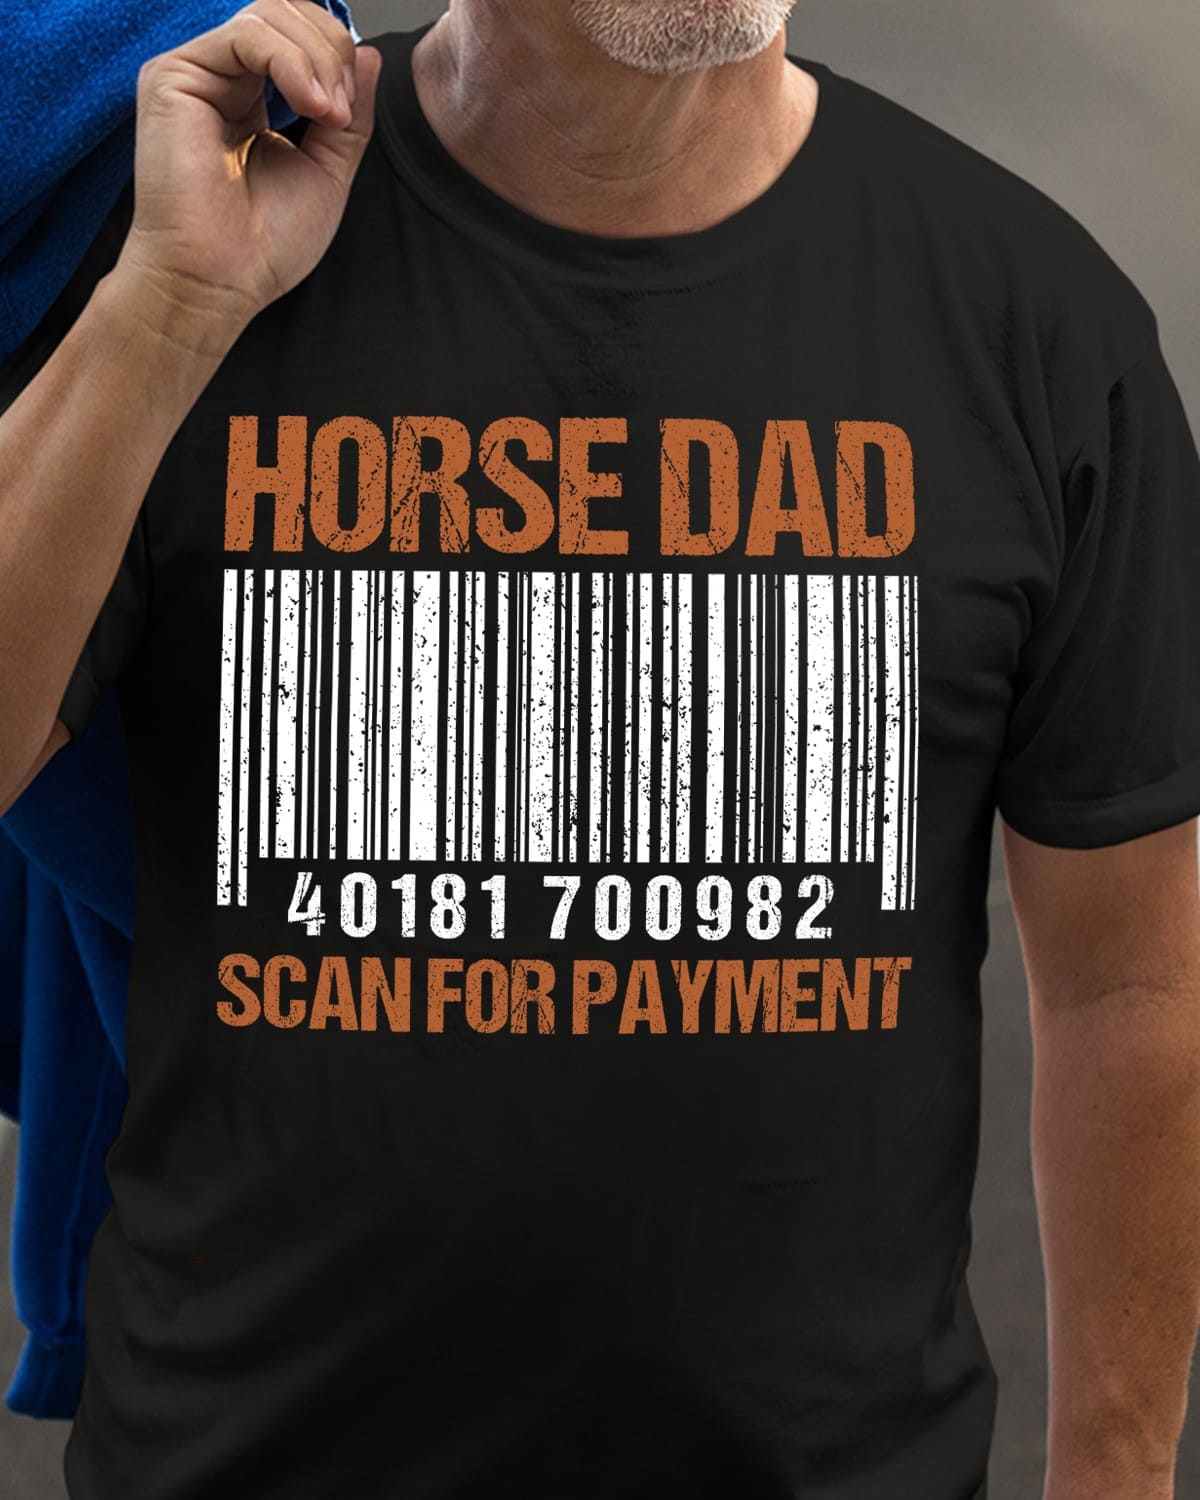 Scan Code - Horse dad scan for payment